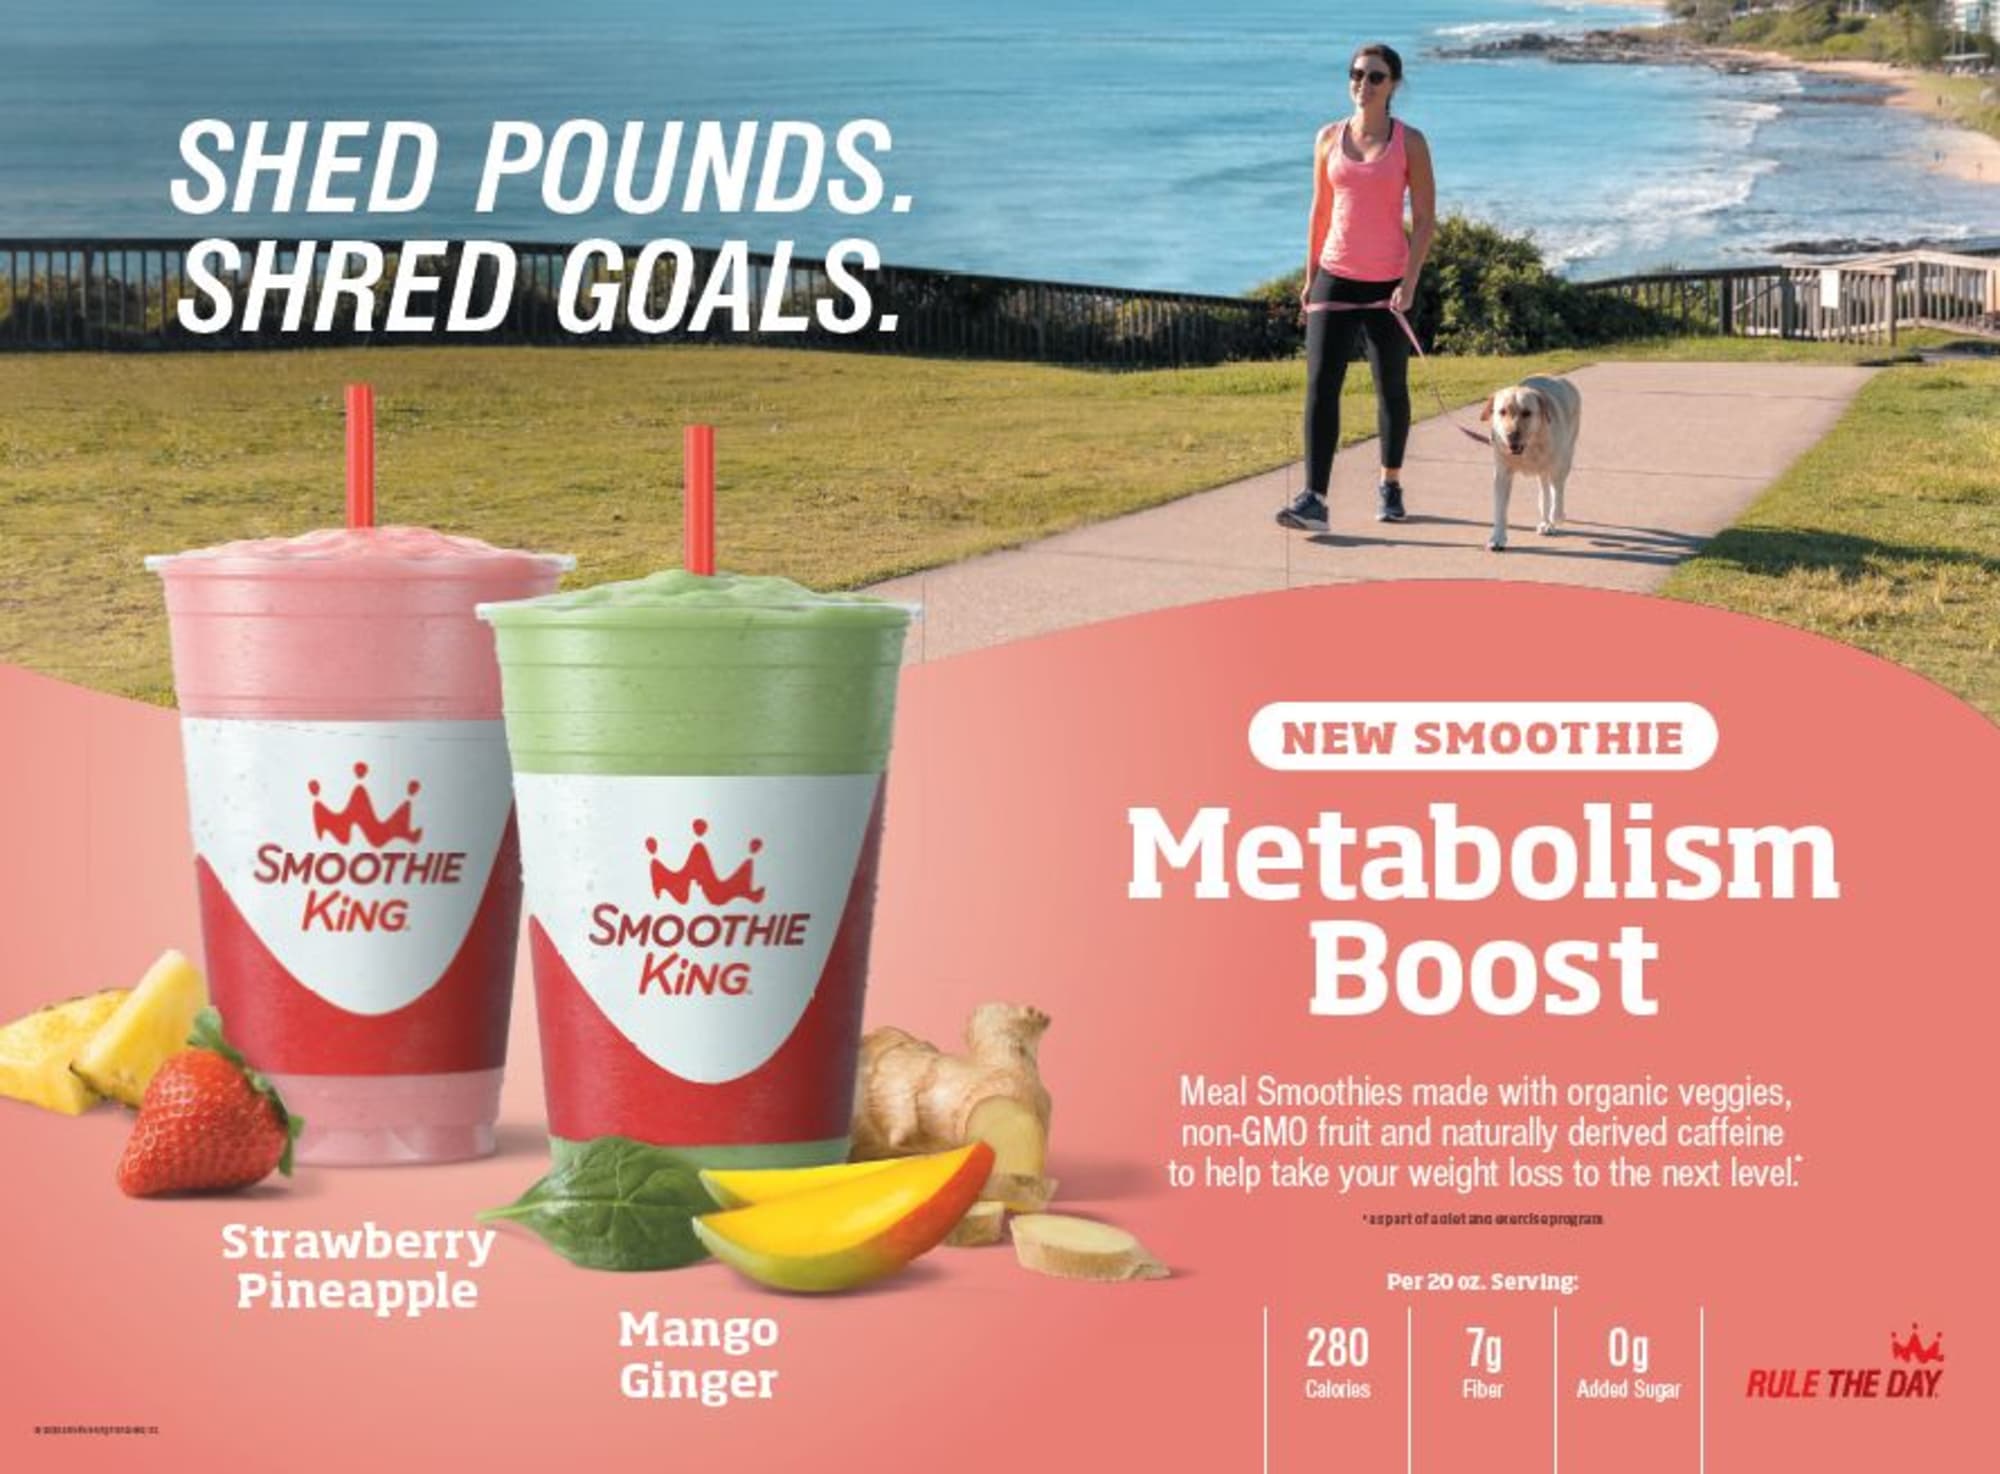 Smoothie King new flavors look to give fans a boost before summer